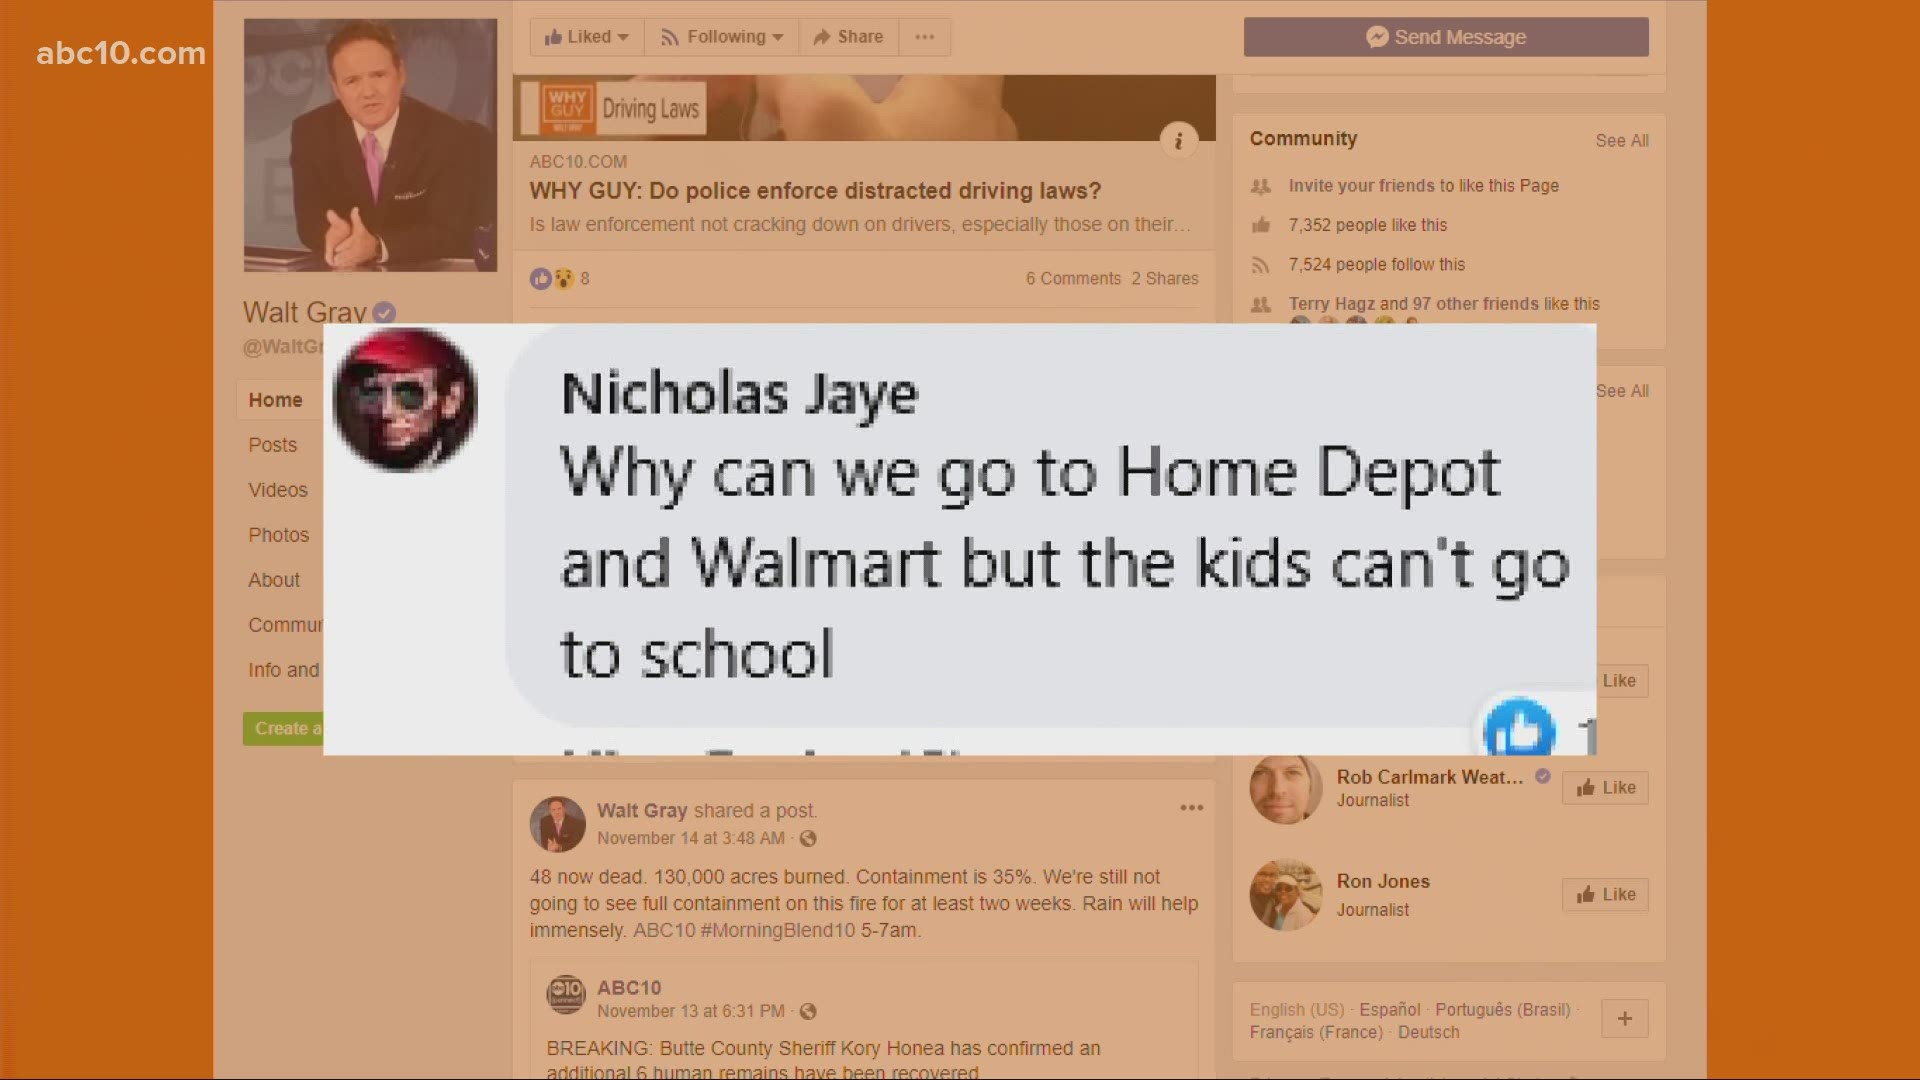 'Why Guy' answers a question from Nicholas Jaye; "Why can we go to Home Depot and Walmart but the kids can't go to school?"